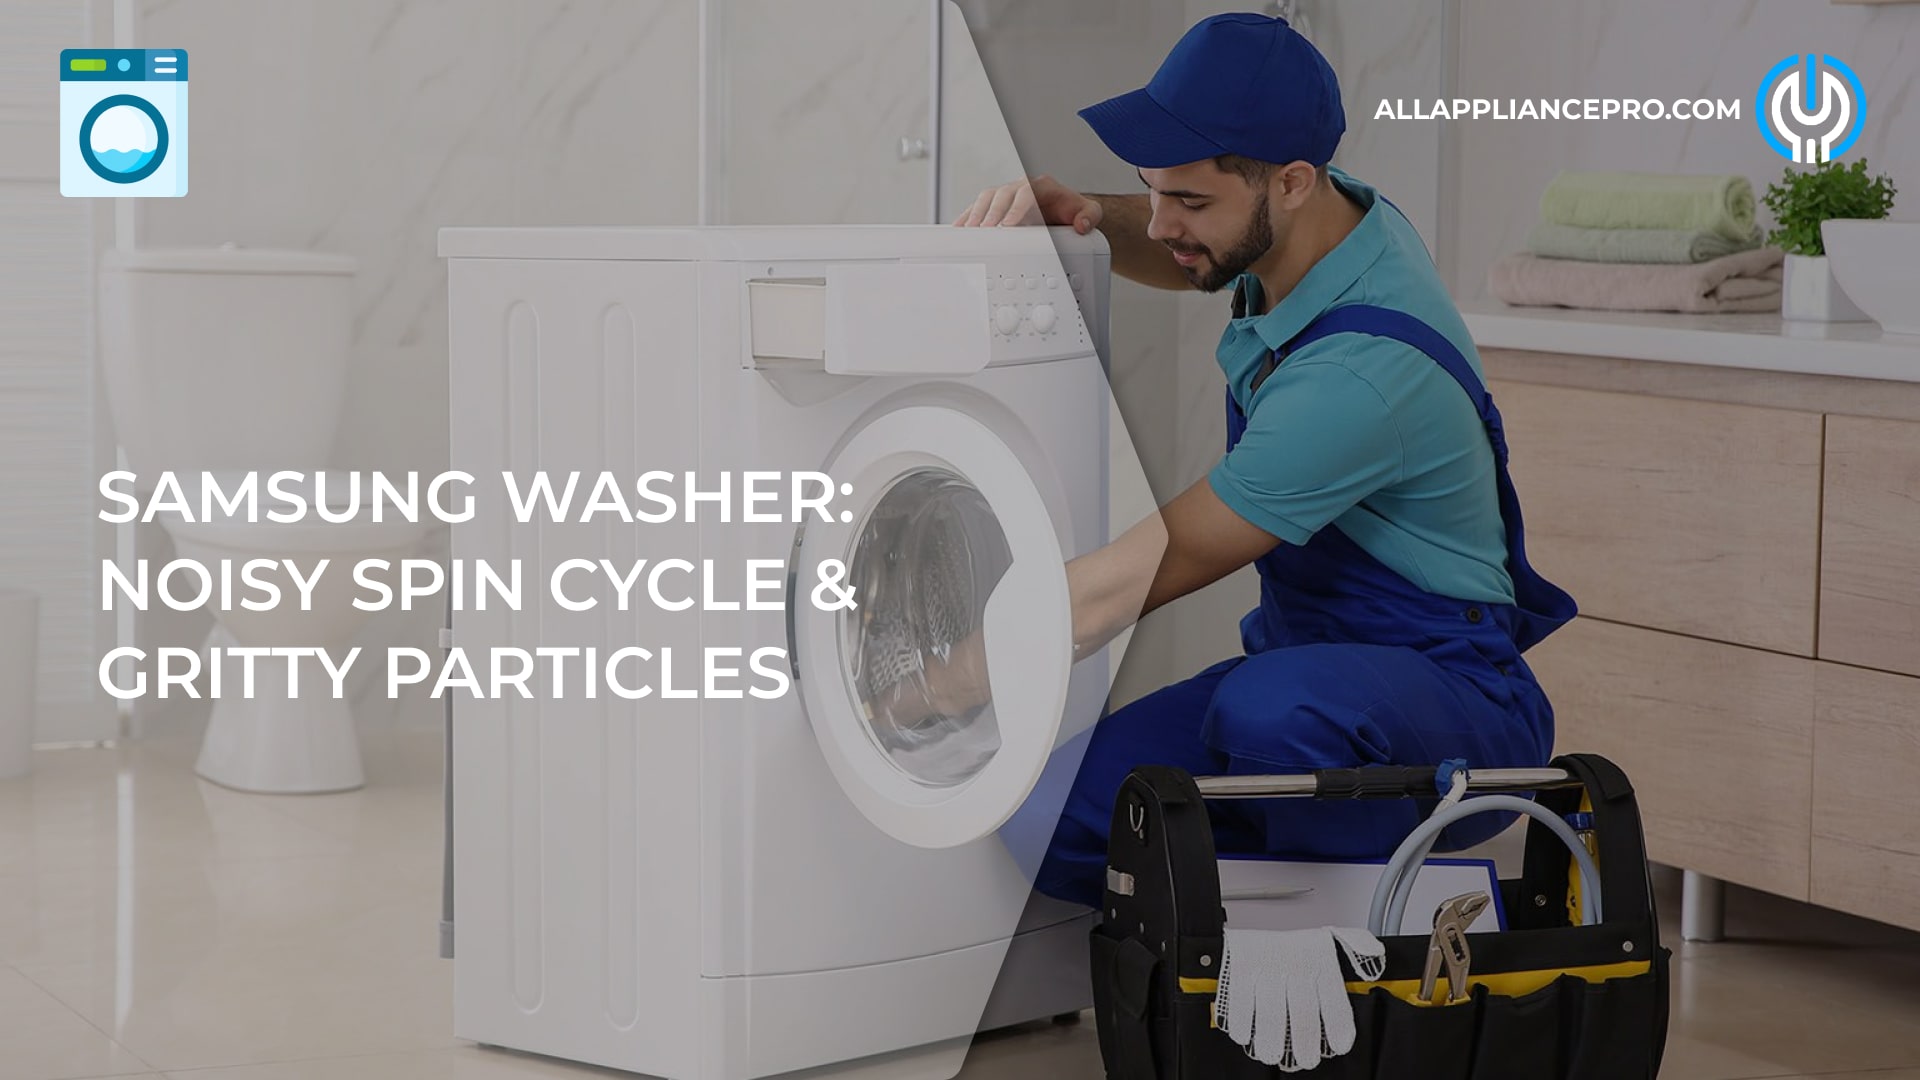 https://allappliancepro.com/repair-guides/samsung-washer-noisy-spin-cycle-and-gritty-black-particles-how-fix